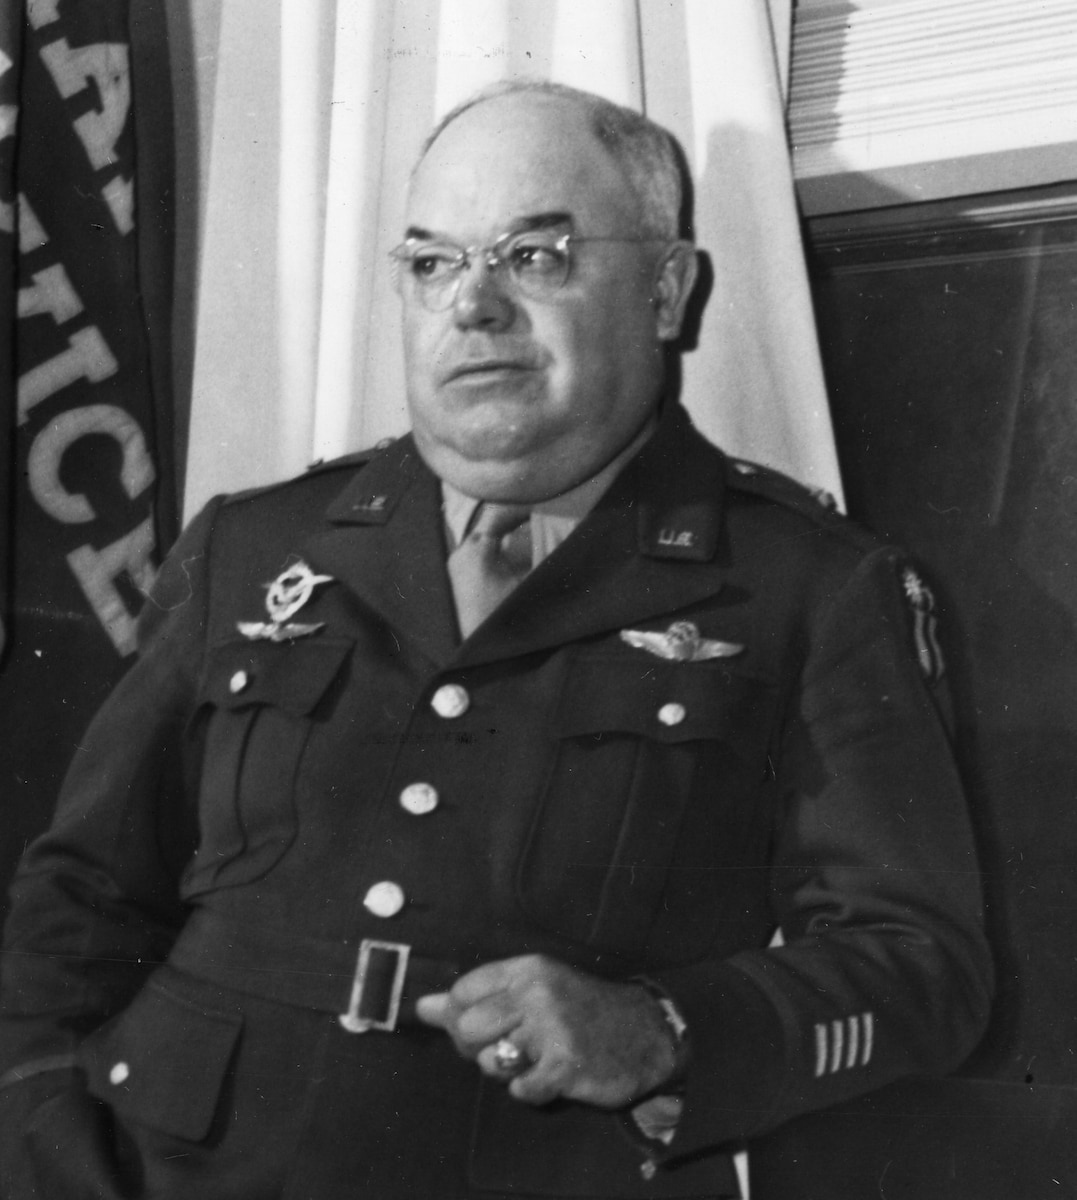 This is the official portrait of Brig. Gen. Frank Dennis Hackett.